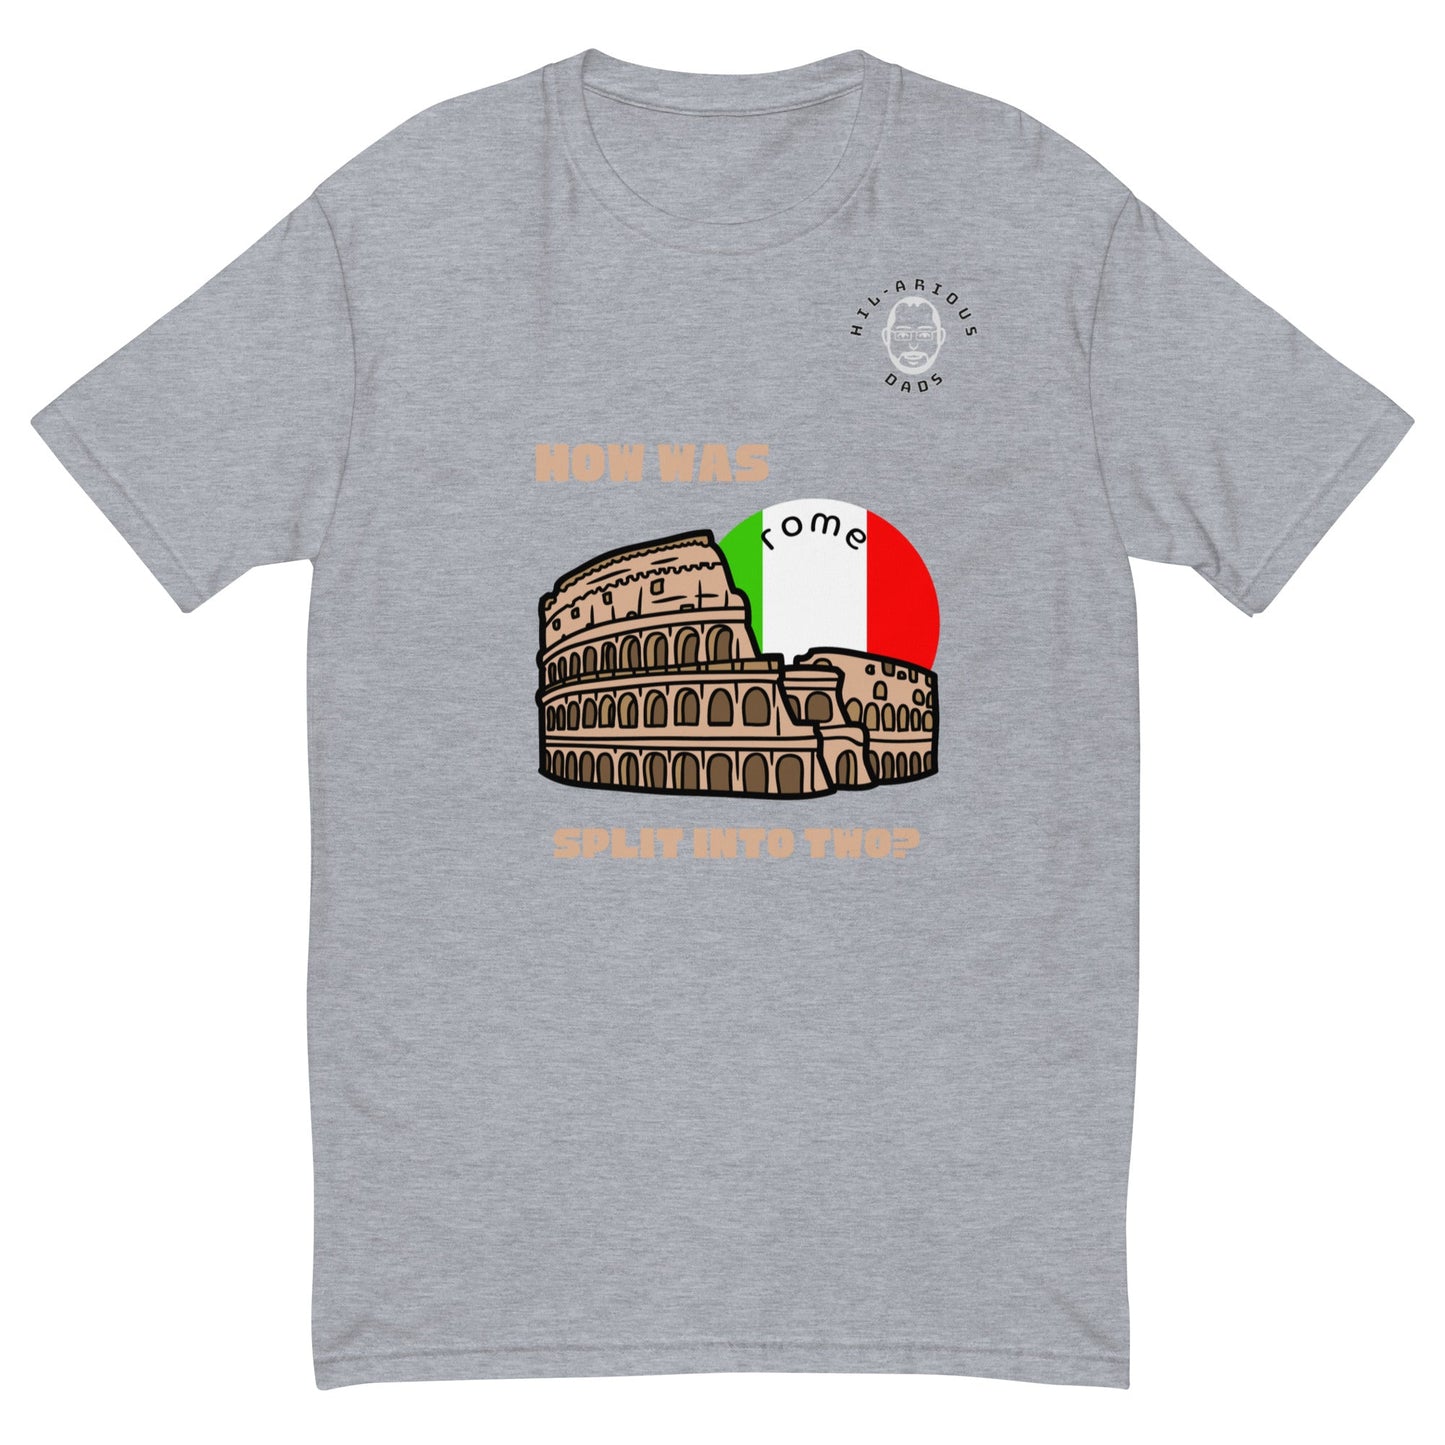 How was Rome split in two?-T-shirt - Hil-arious Dads